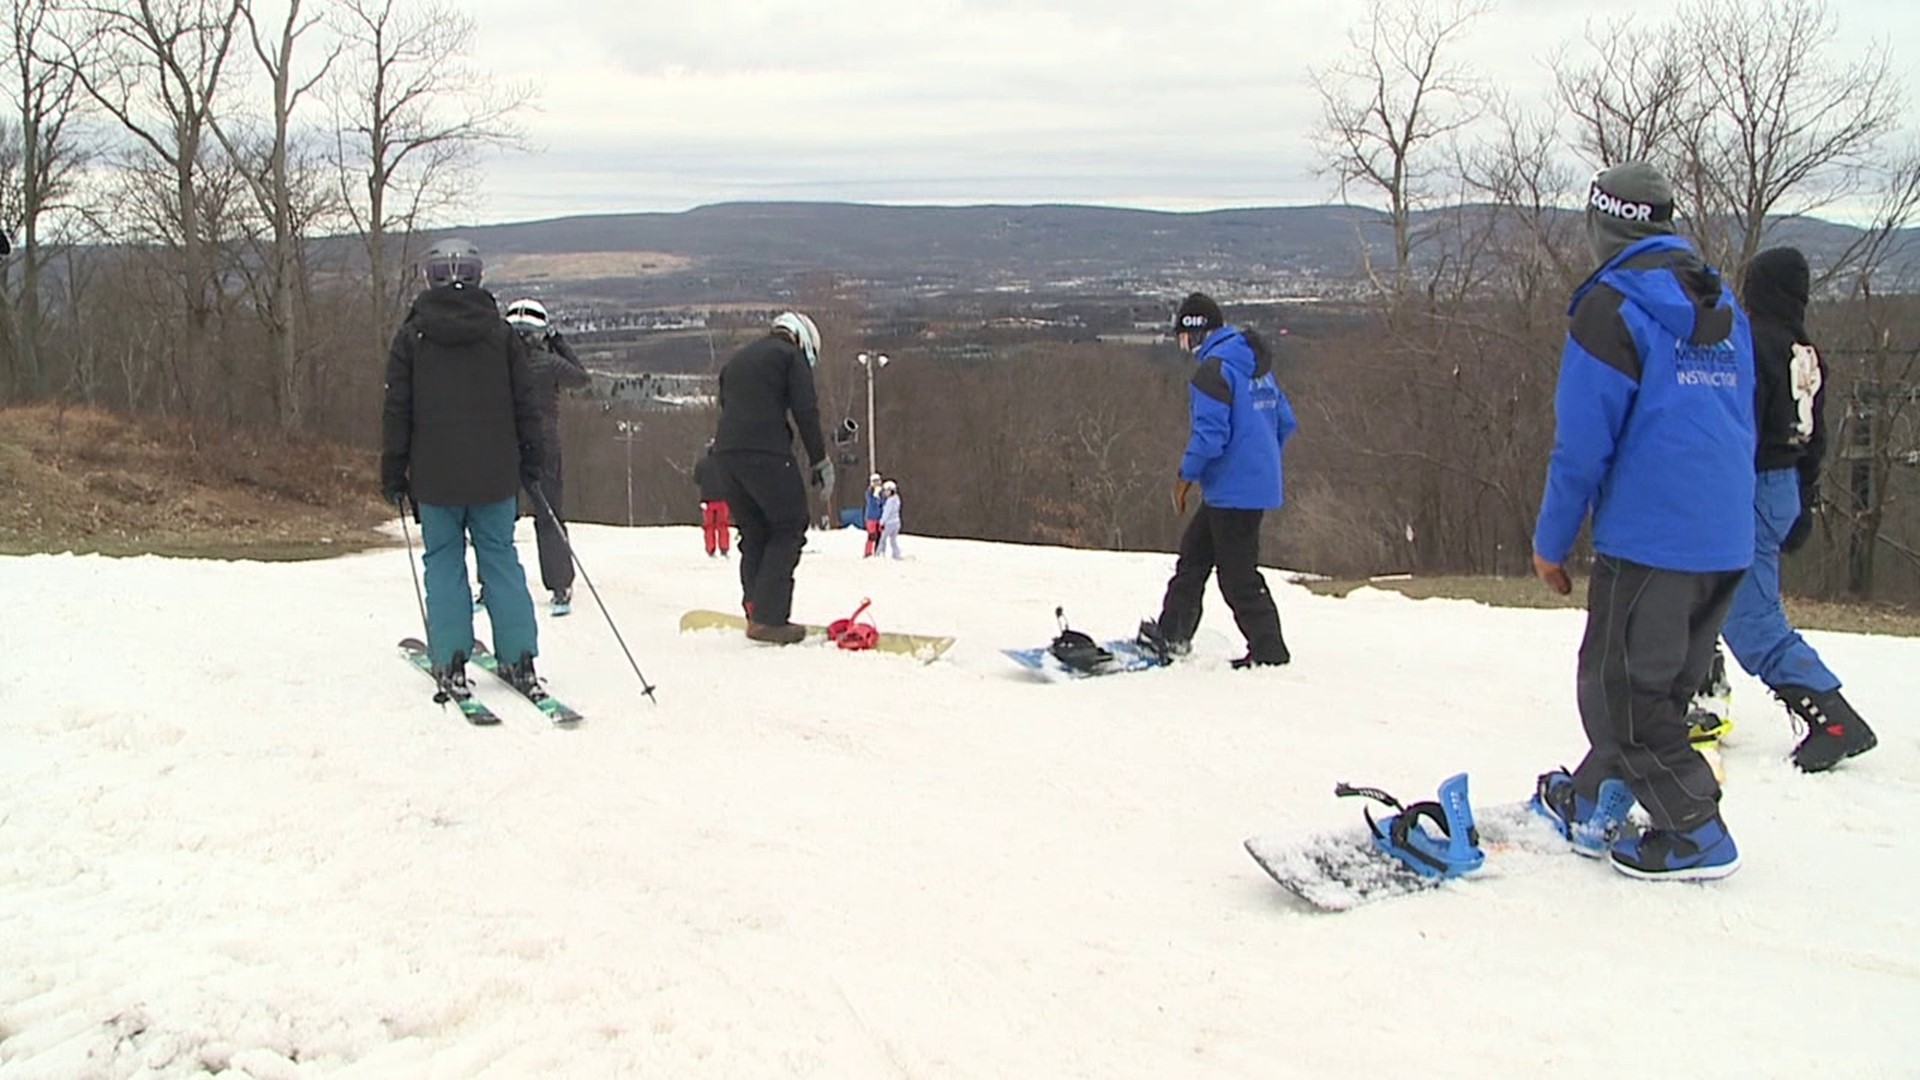 Skiers took advantage of the last day of the season at the resort along with a good cause.